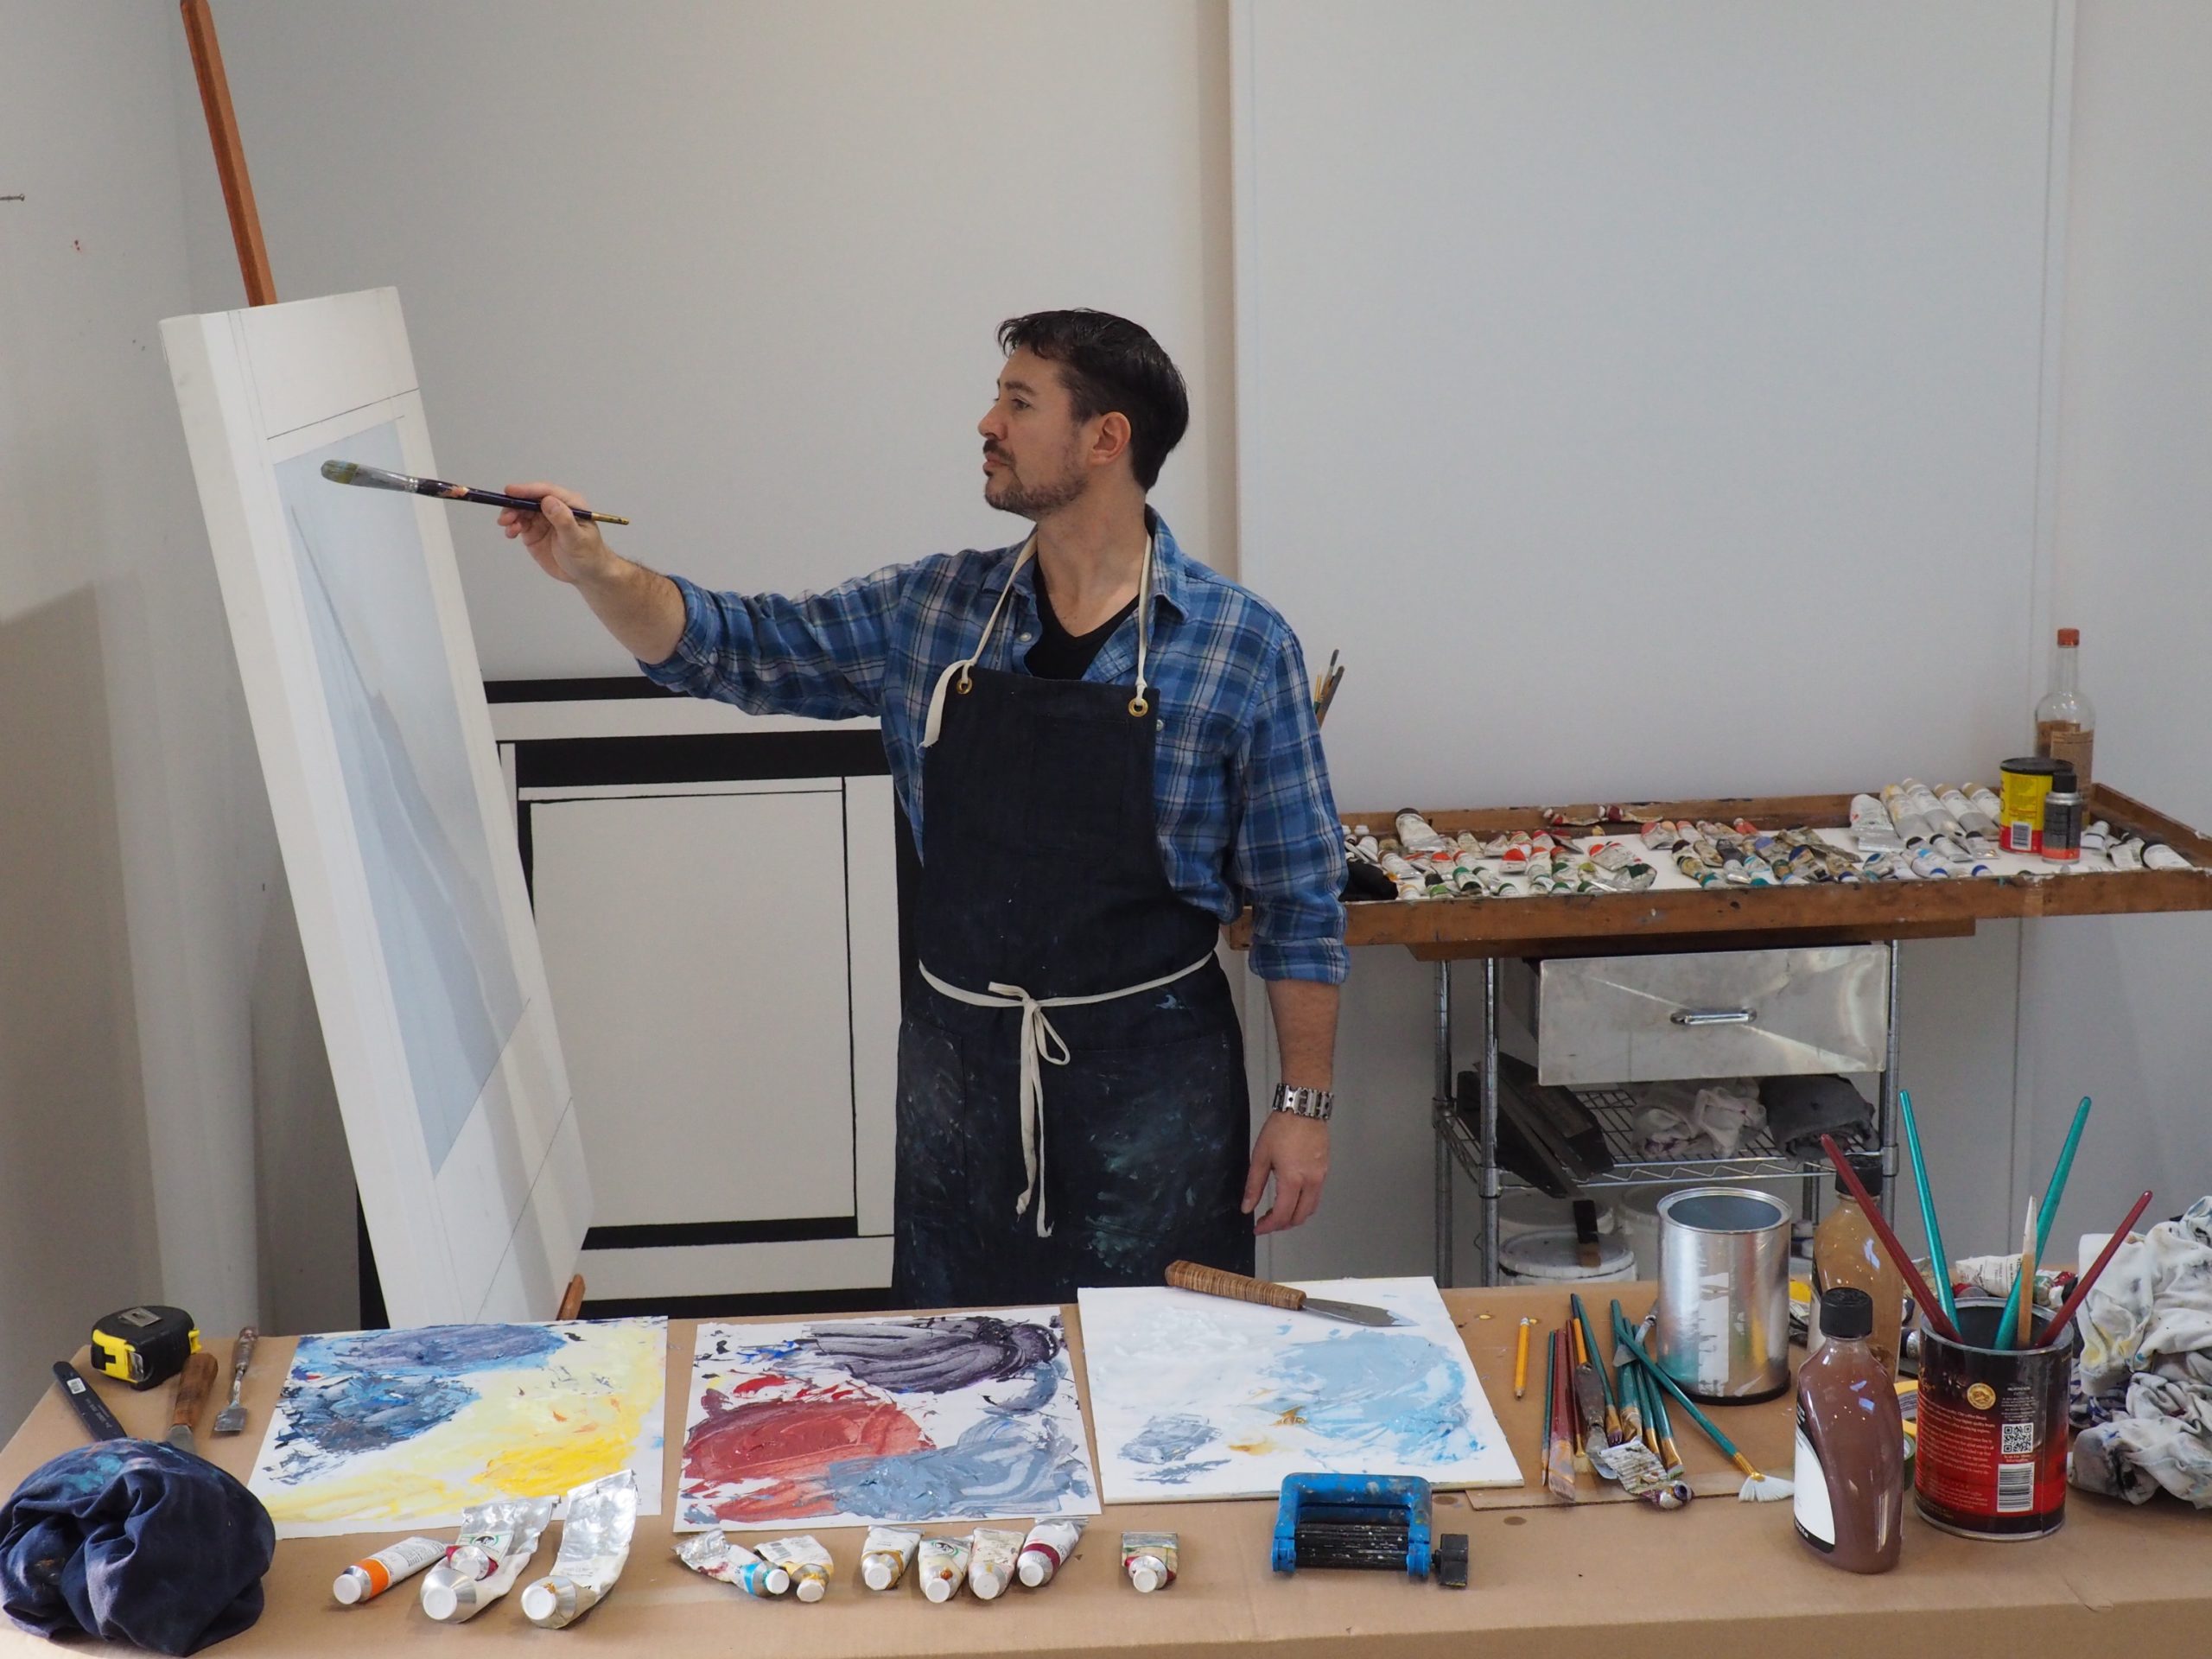 Artist Chris Kelly works on a painting in his studio.